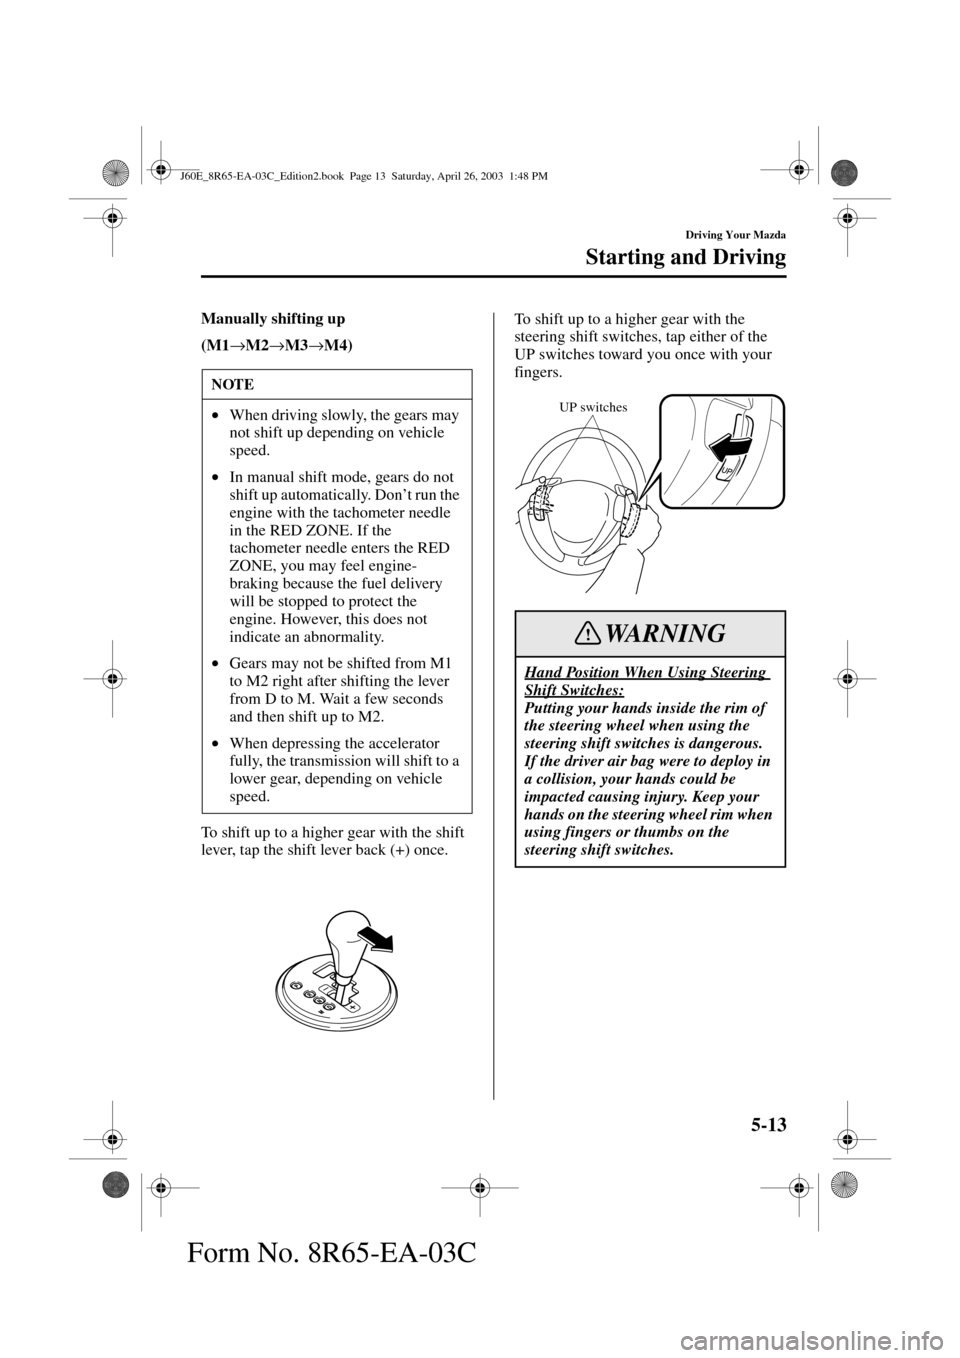 MAZDA MODEL RX 8 2004  Owners Manual (in English) 5-13
Driving Your Mazda
Starting and Driving
Form No. 8R65-EA-03C
Manually shifting up
(M1
→M2
→M3
→M4)
To shift up to a higher gear with the shift 
lever, tap the shift lever back (+) once.To s